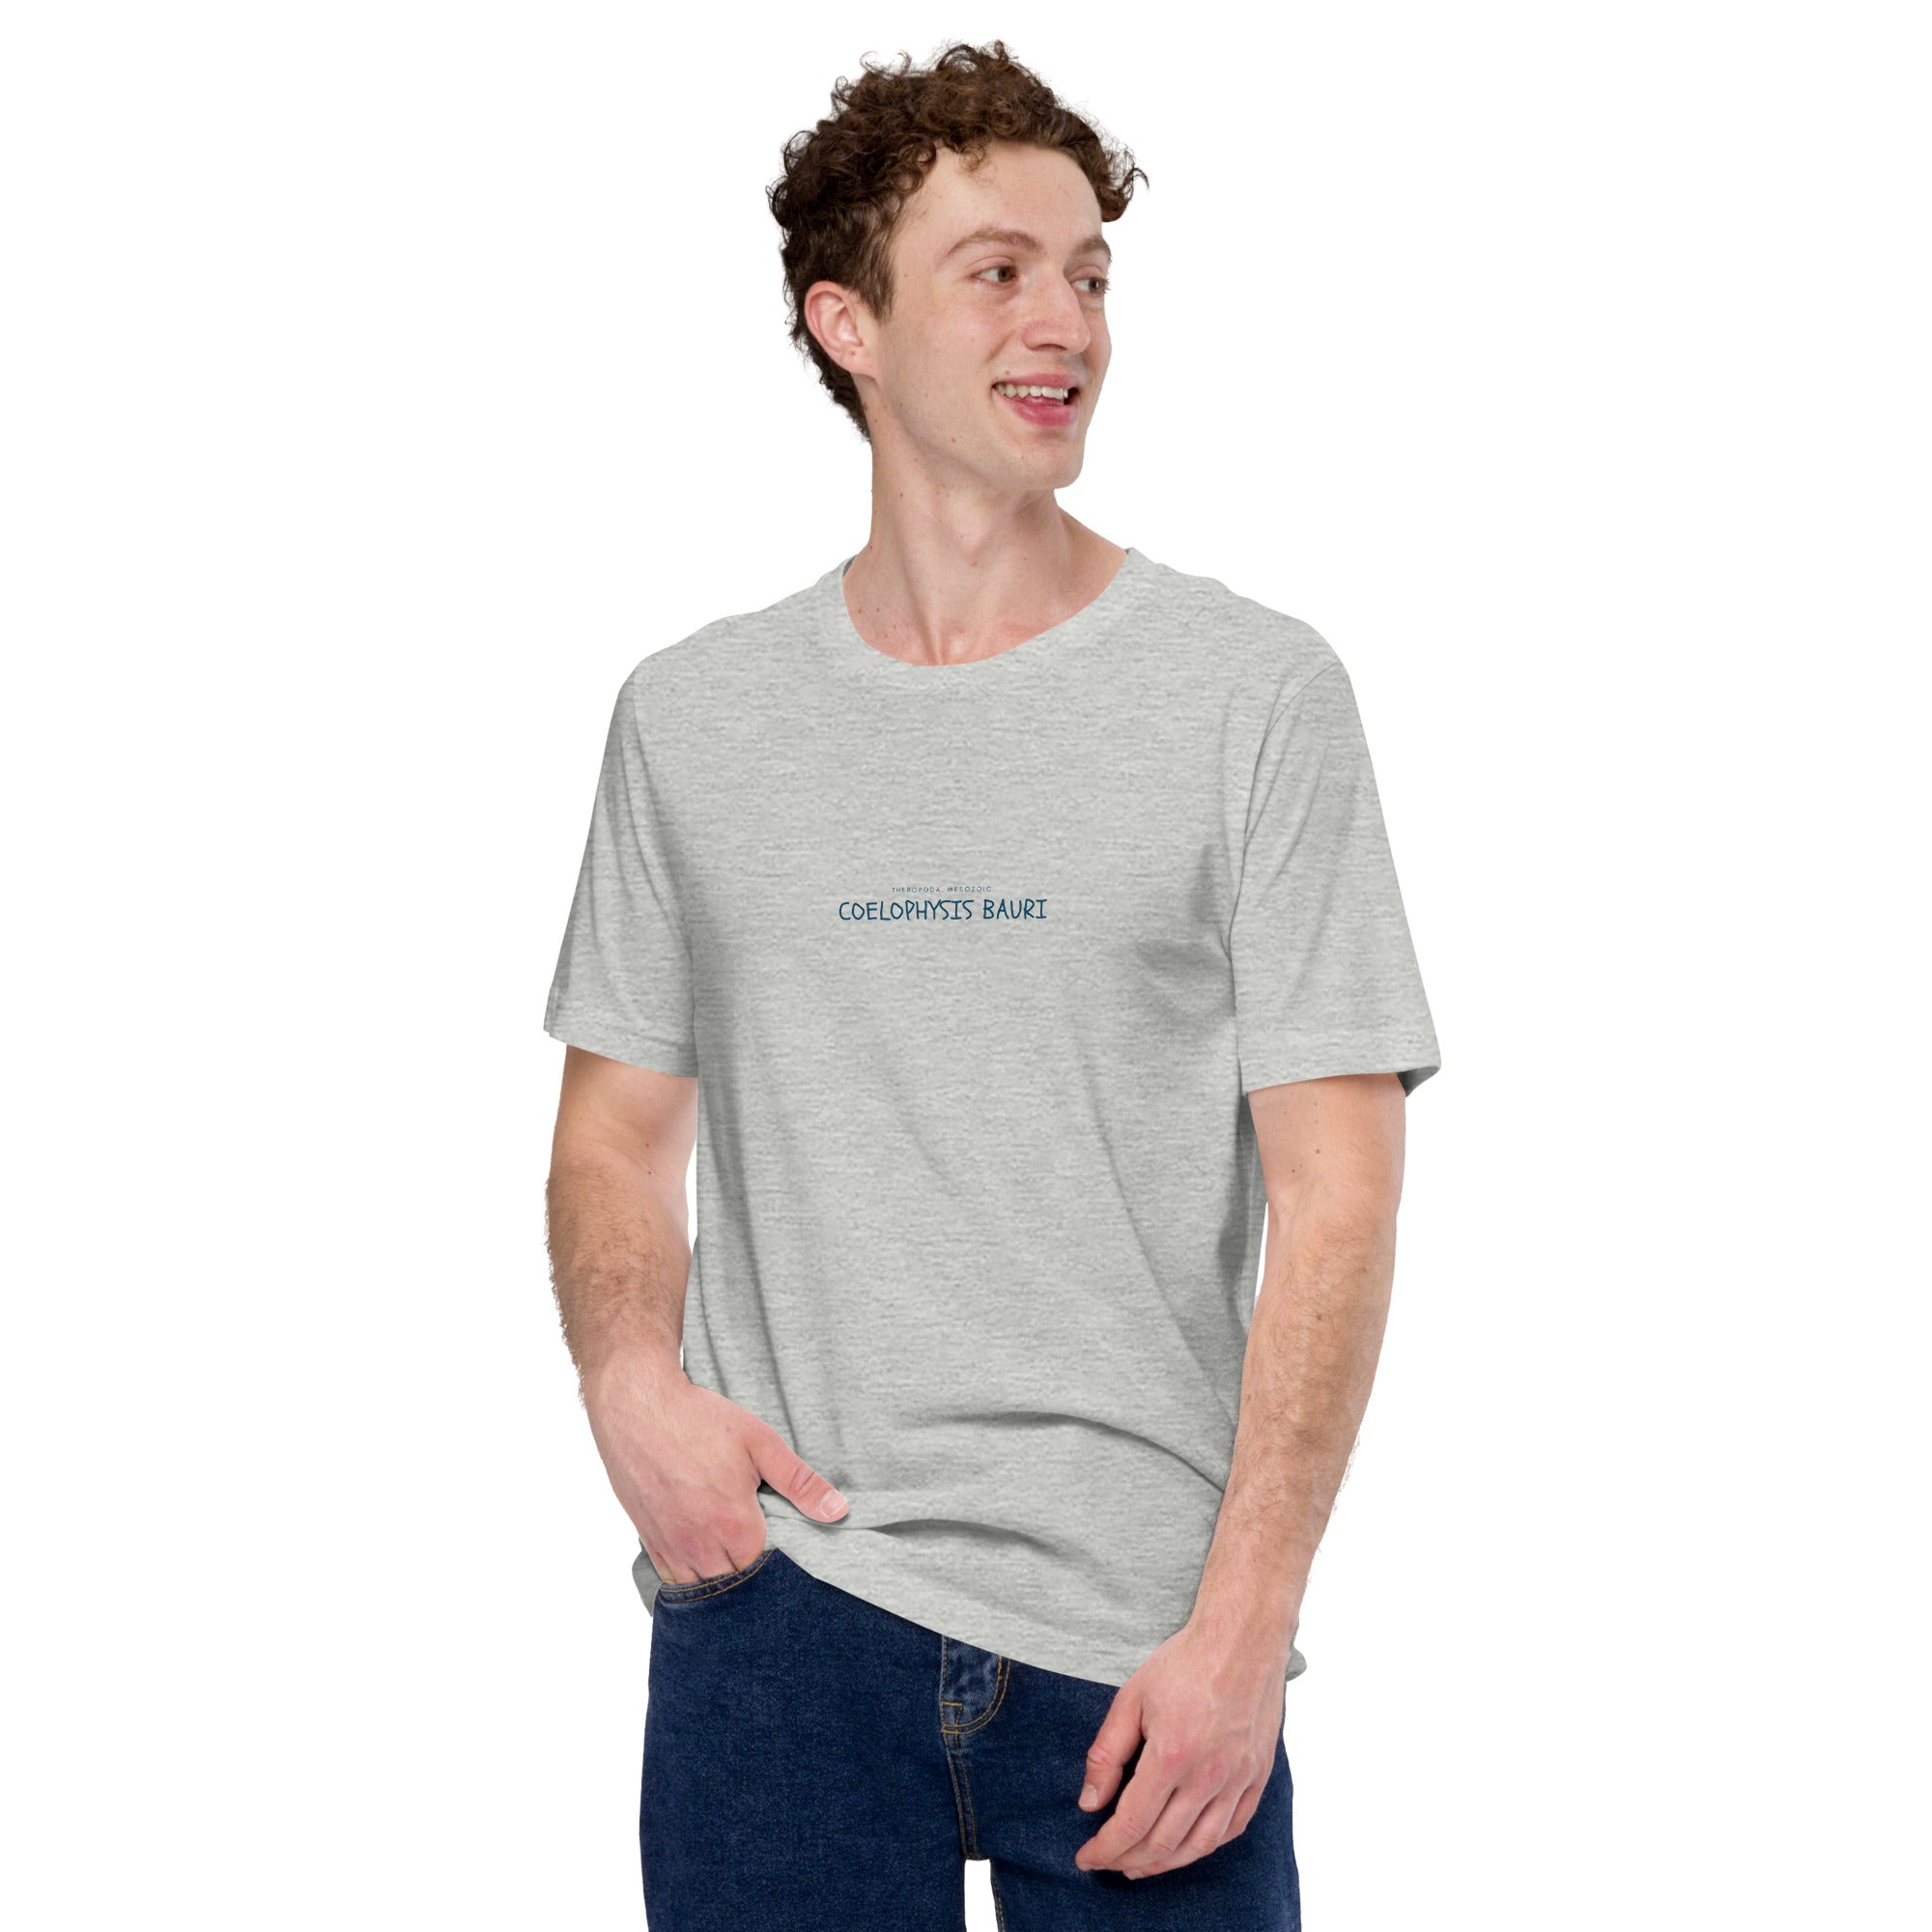 Unisex t-shirt with "Coelophysis bauri" text